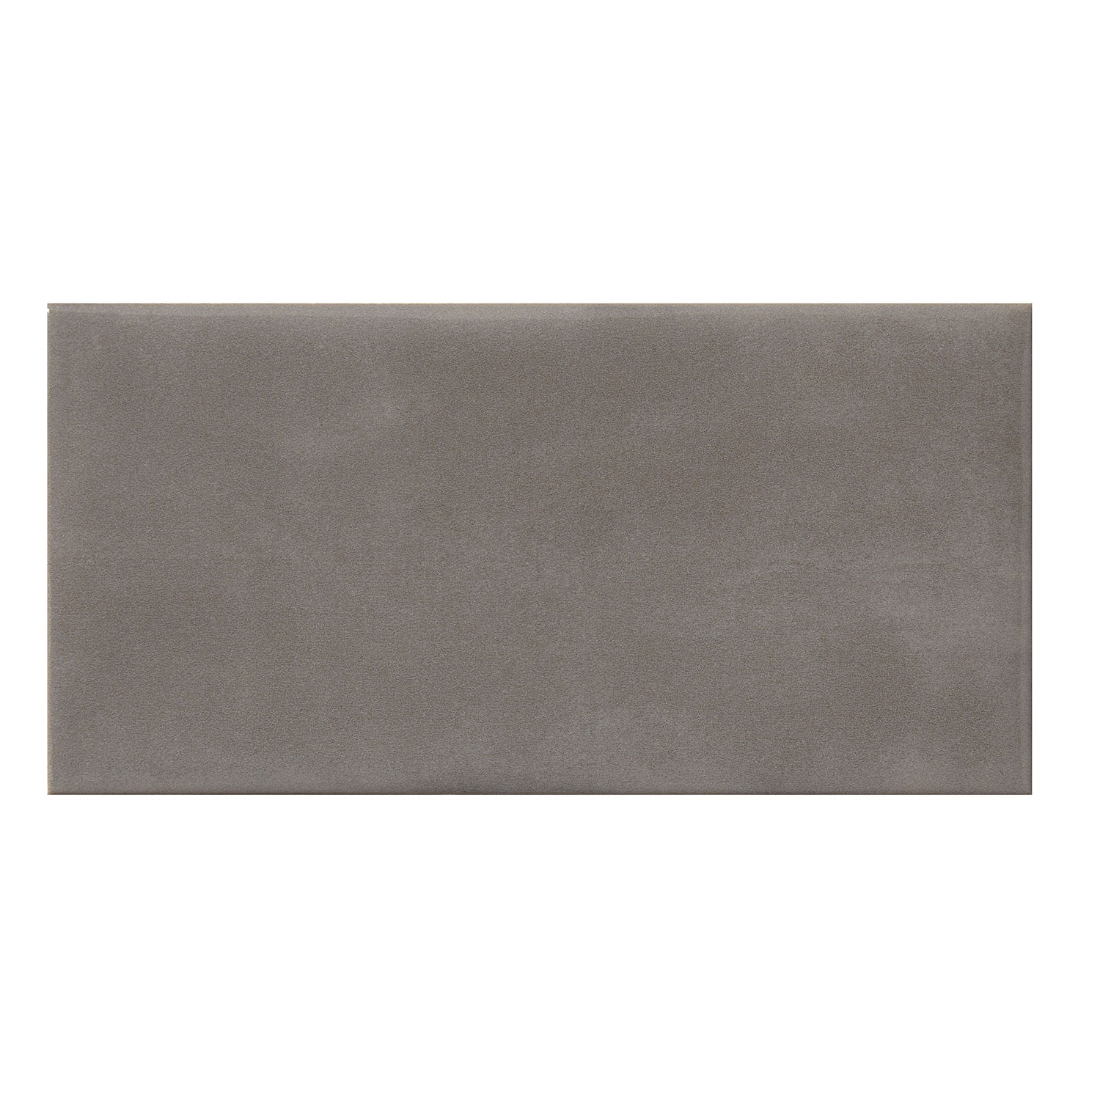 Chantilly Taupe 7.5x15cm (CHAW789-36)